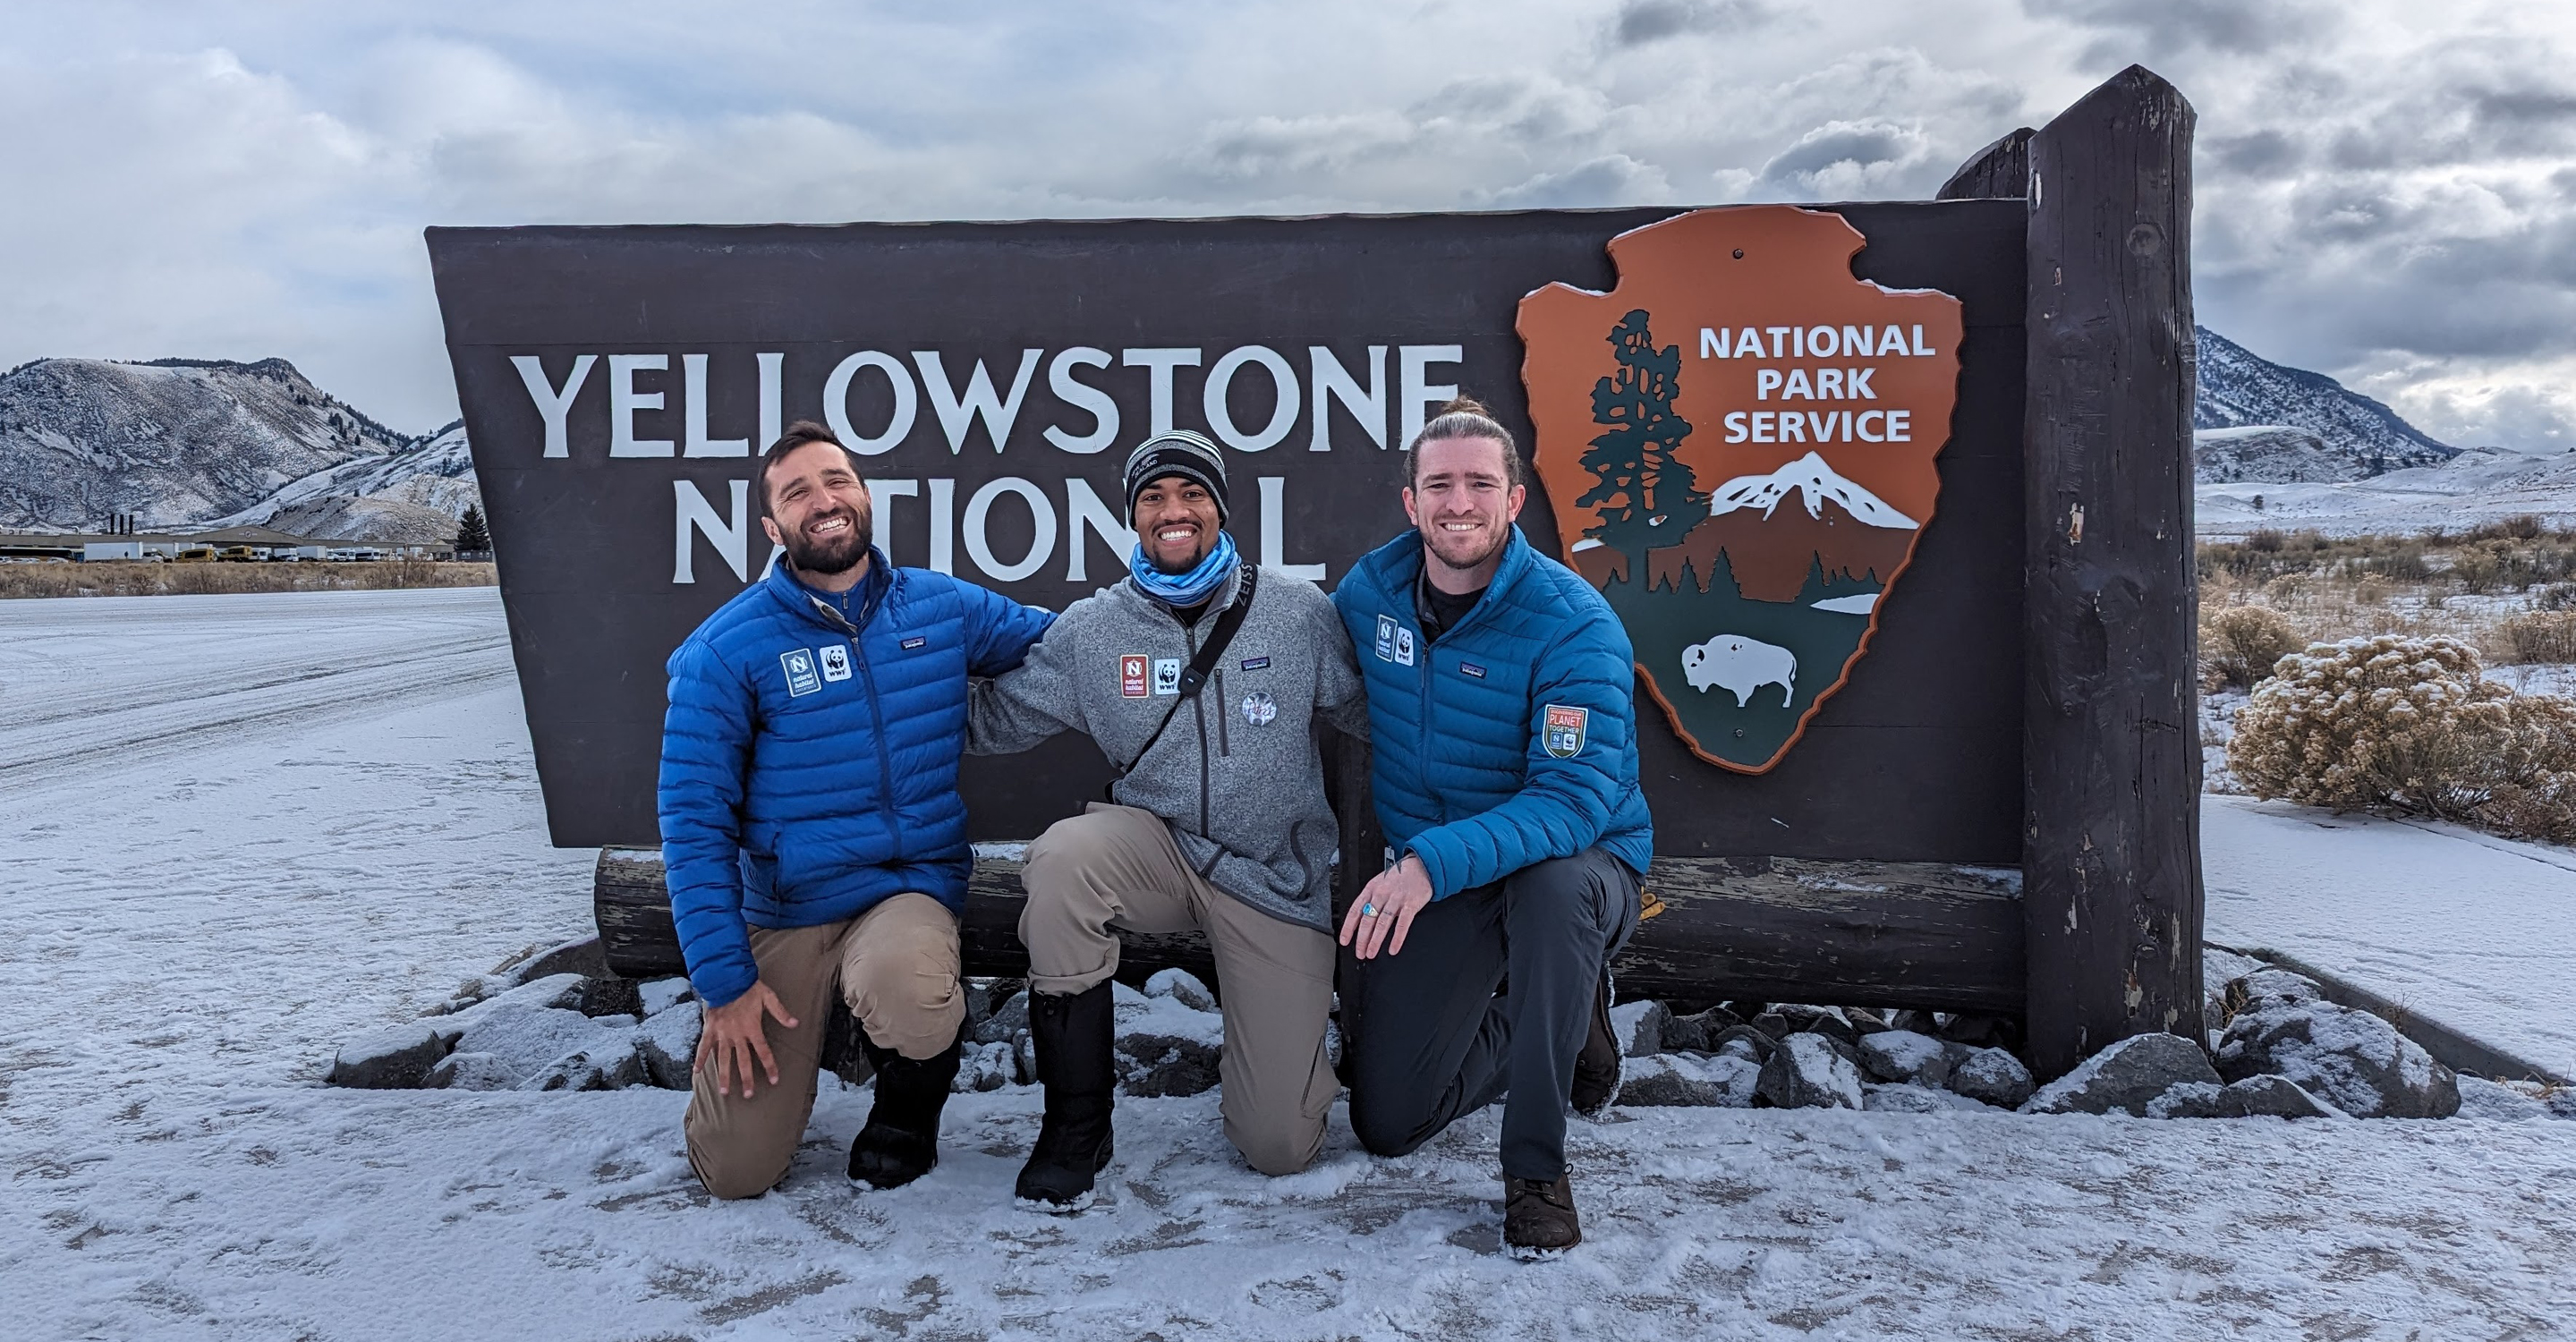 My fellow Expedition Leaders and I guiding in Yellowstone.